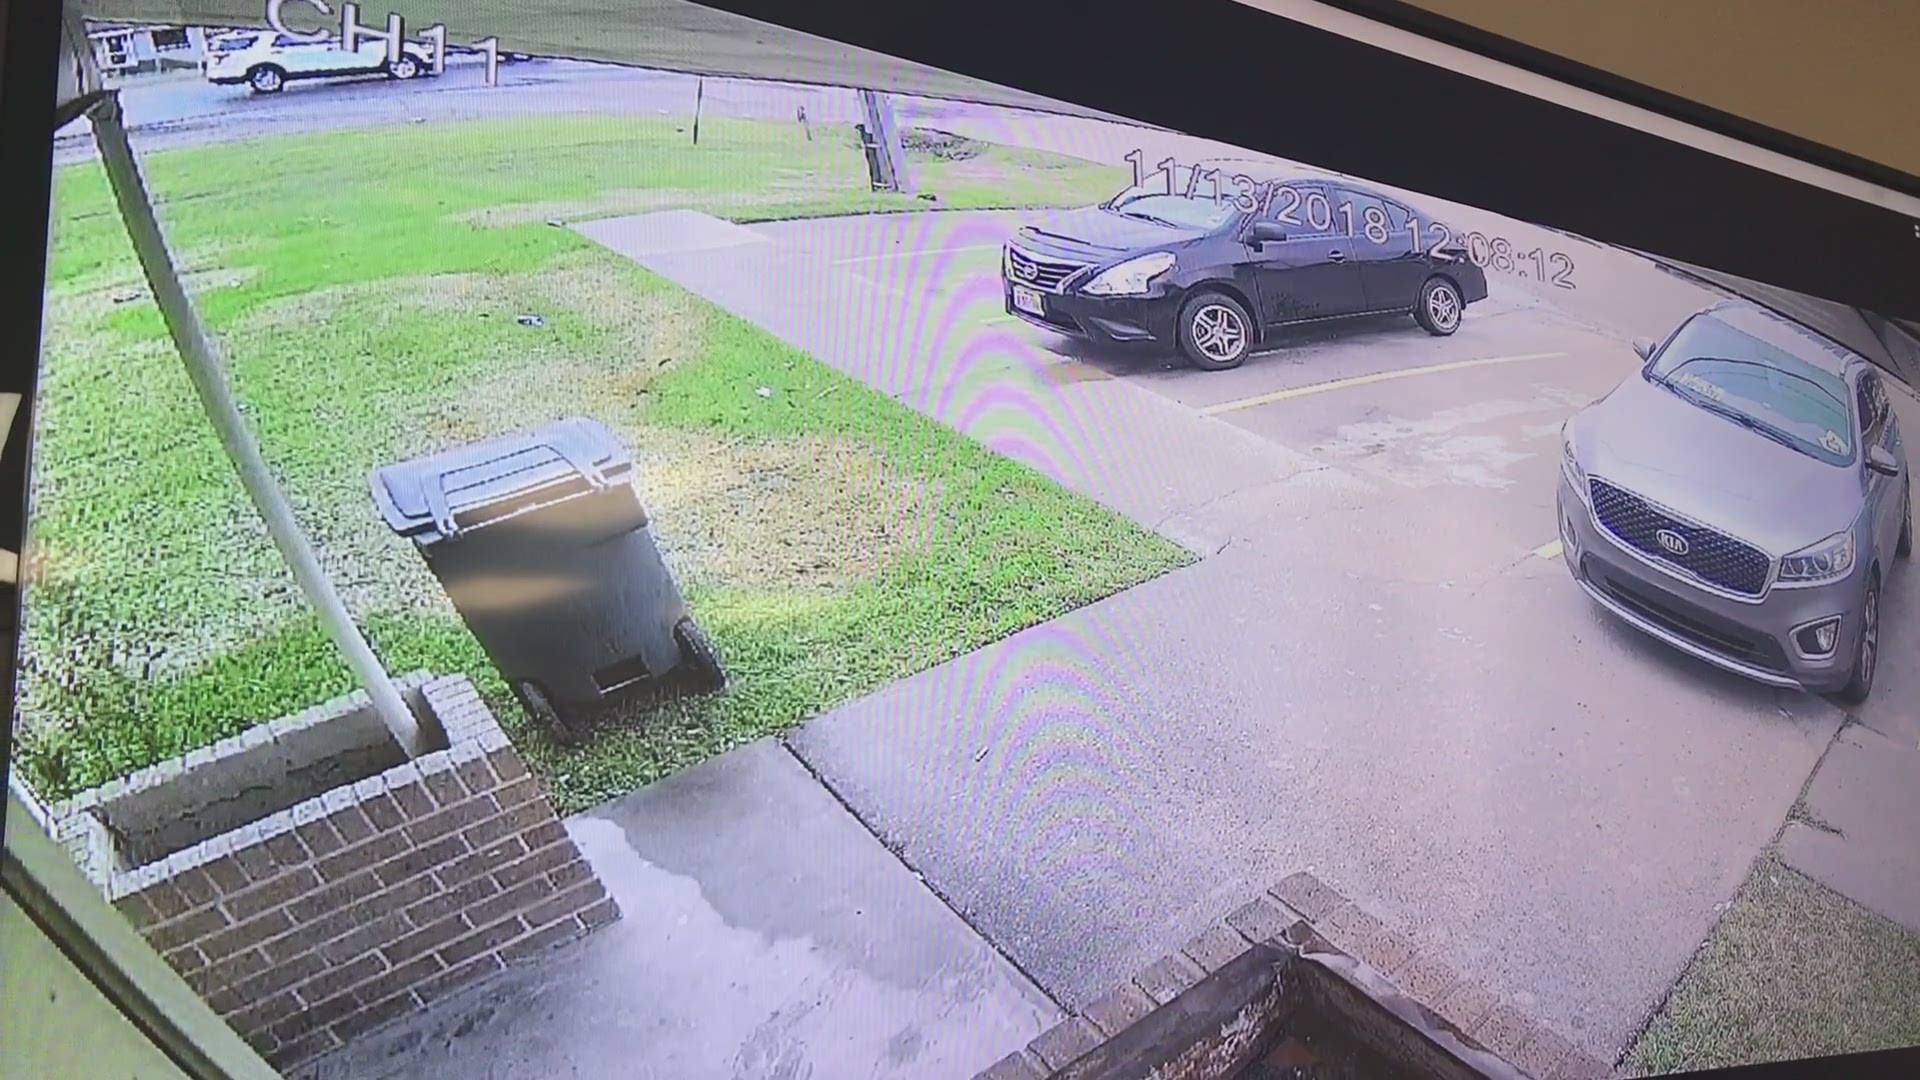 Daytime game room robbery in Port Arthur Thursday afternoon